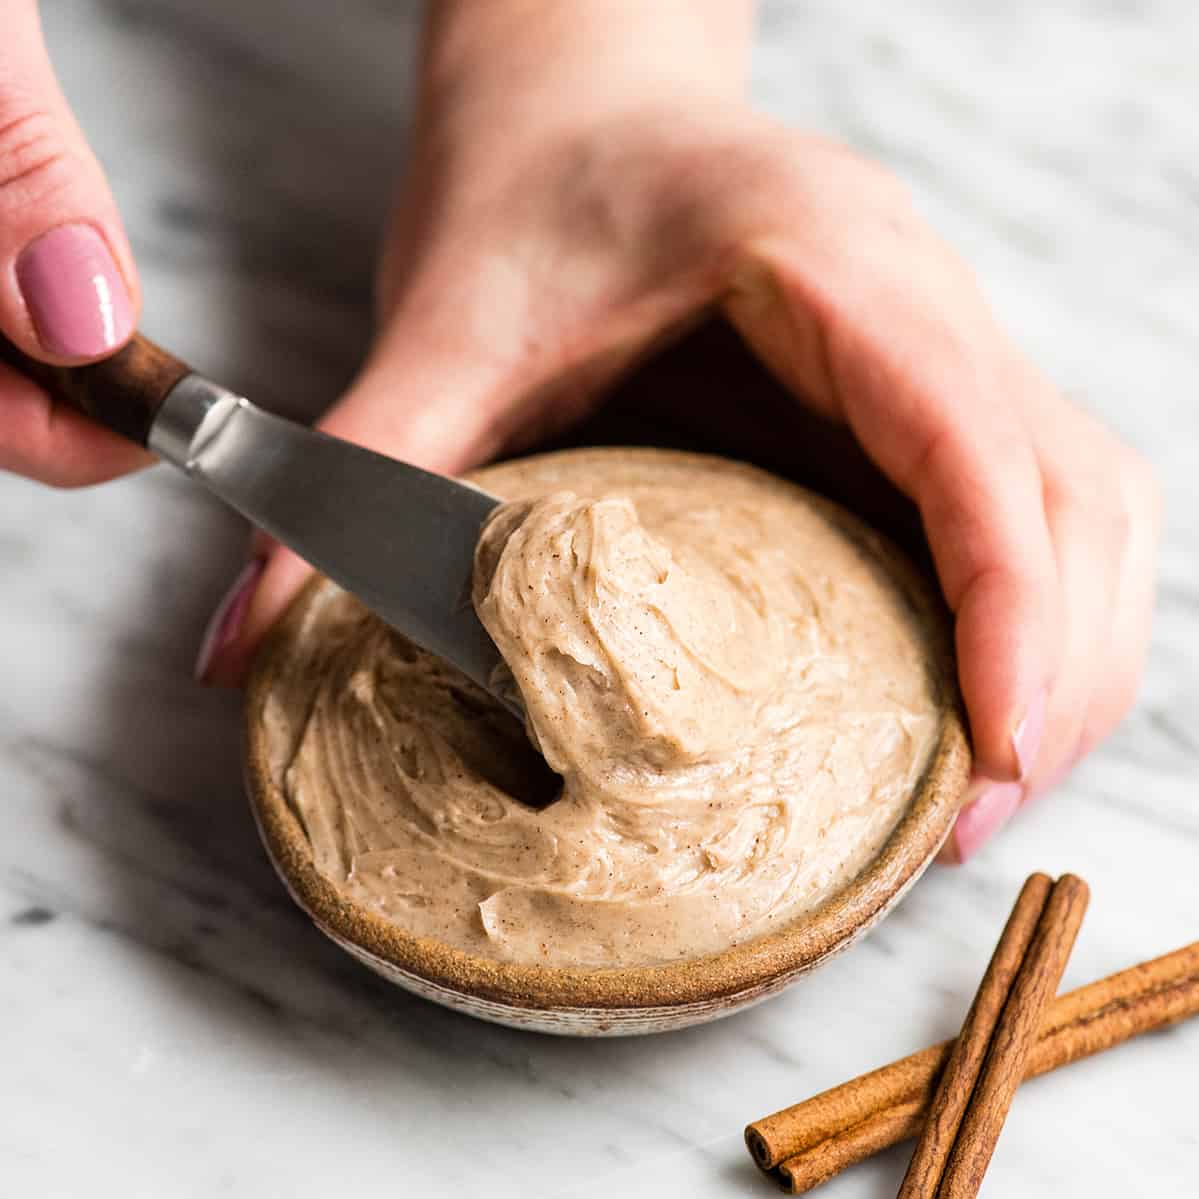 front view of a hand using a knife to scoop some Cinnamon Honey Butter out of a small dish